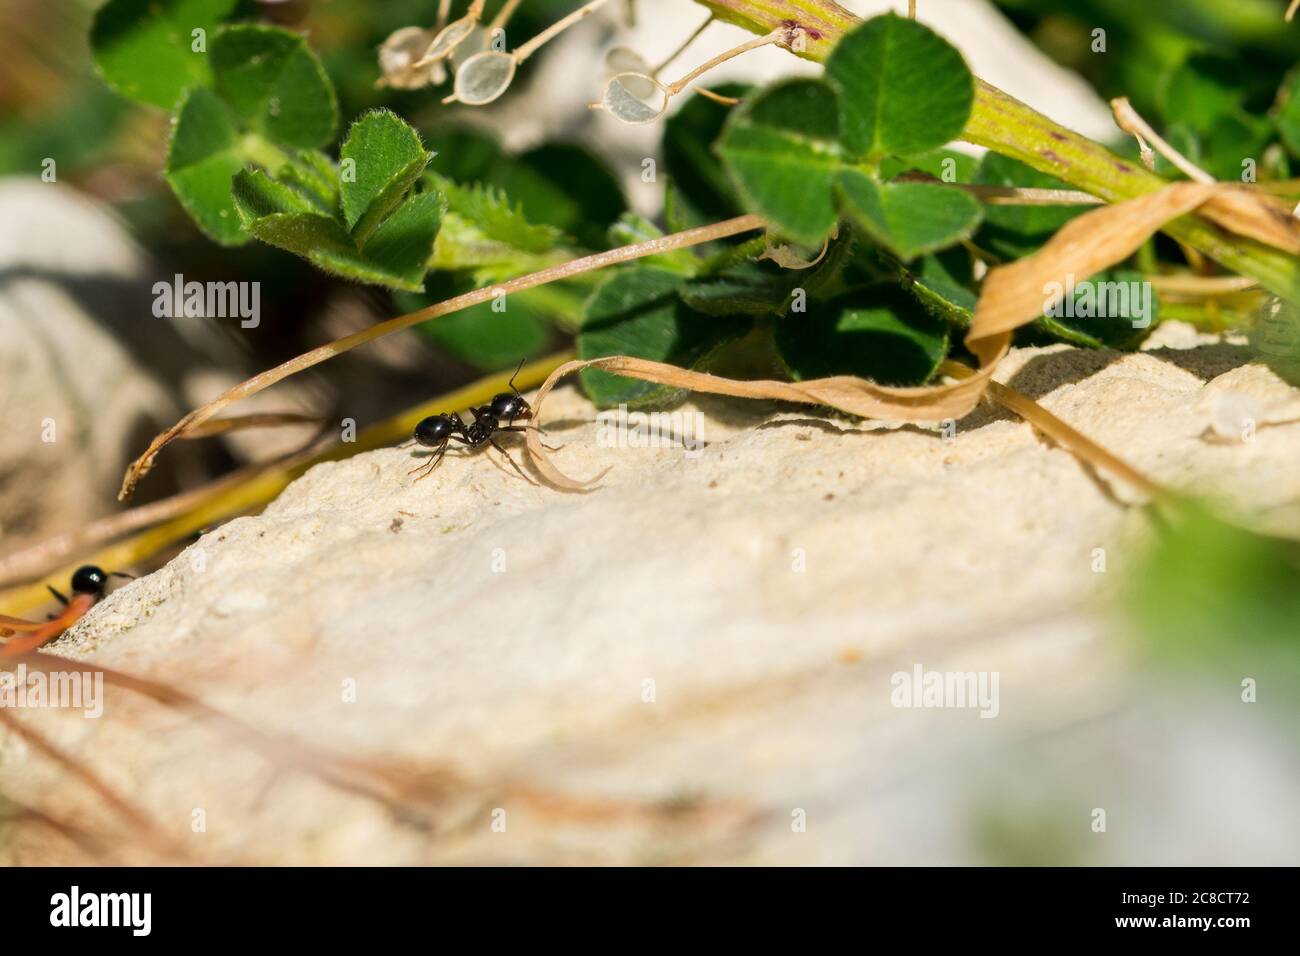 A small black ant showing determination in pulling a piece of dried grass, much bigger than her. Stock Photo